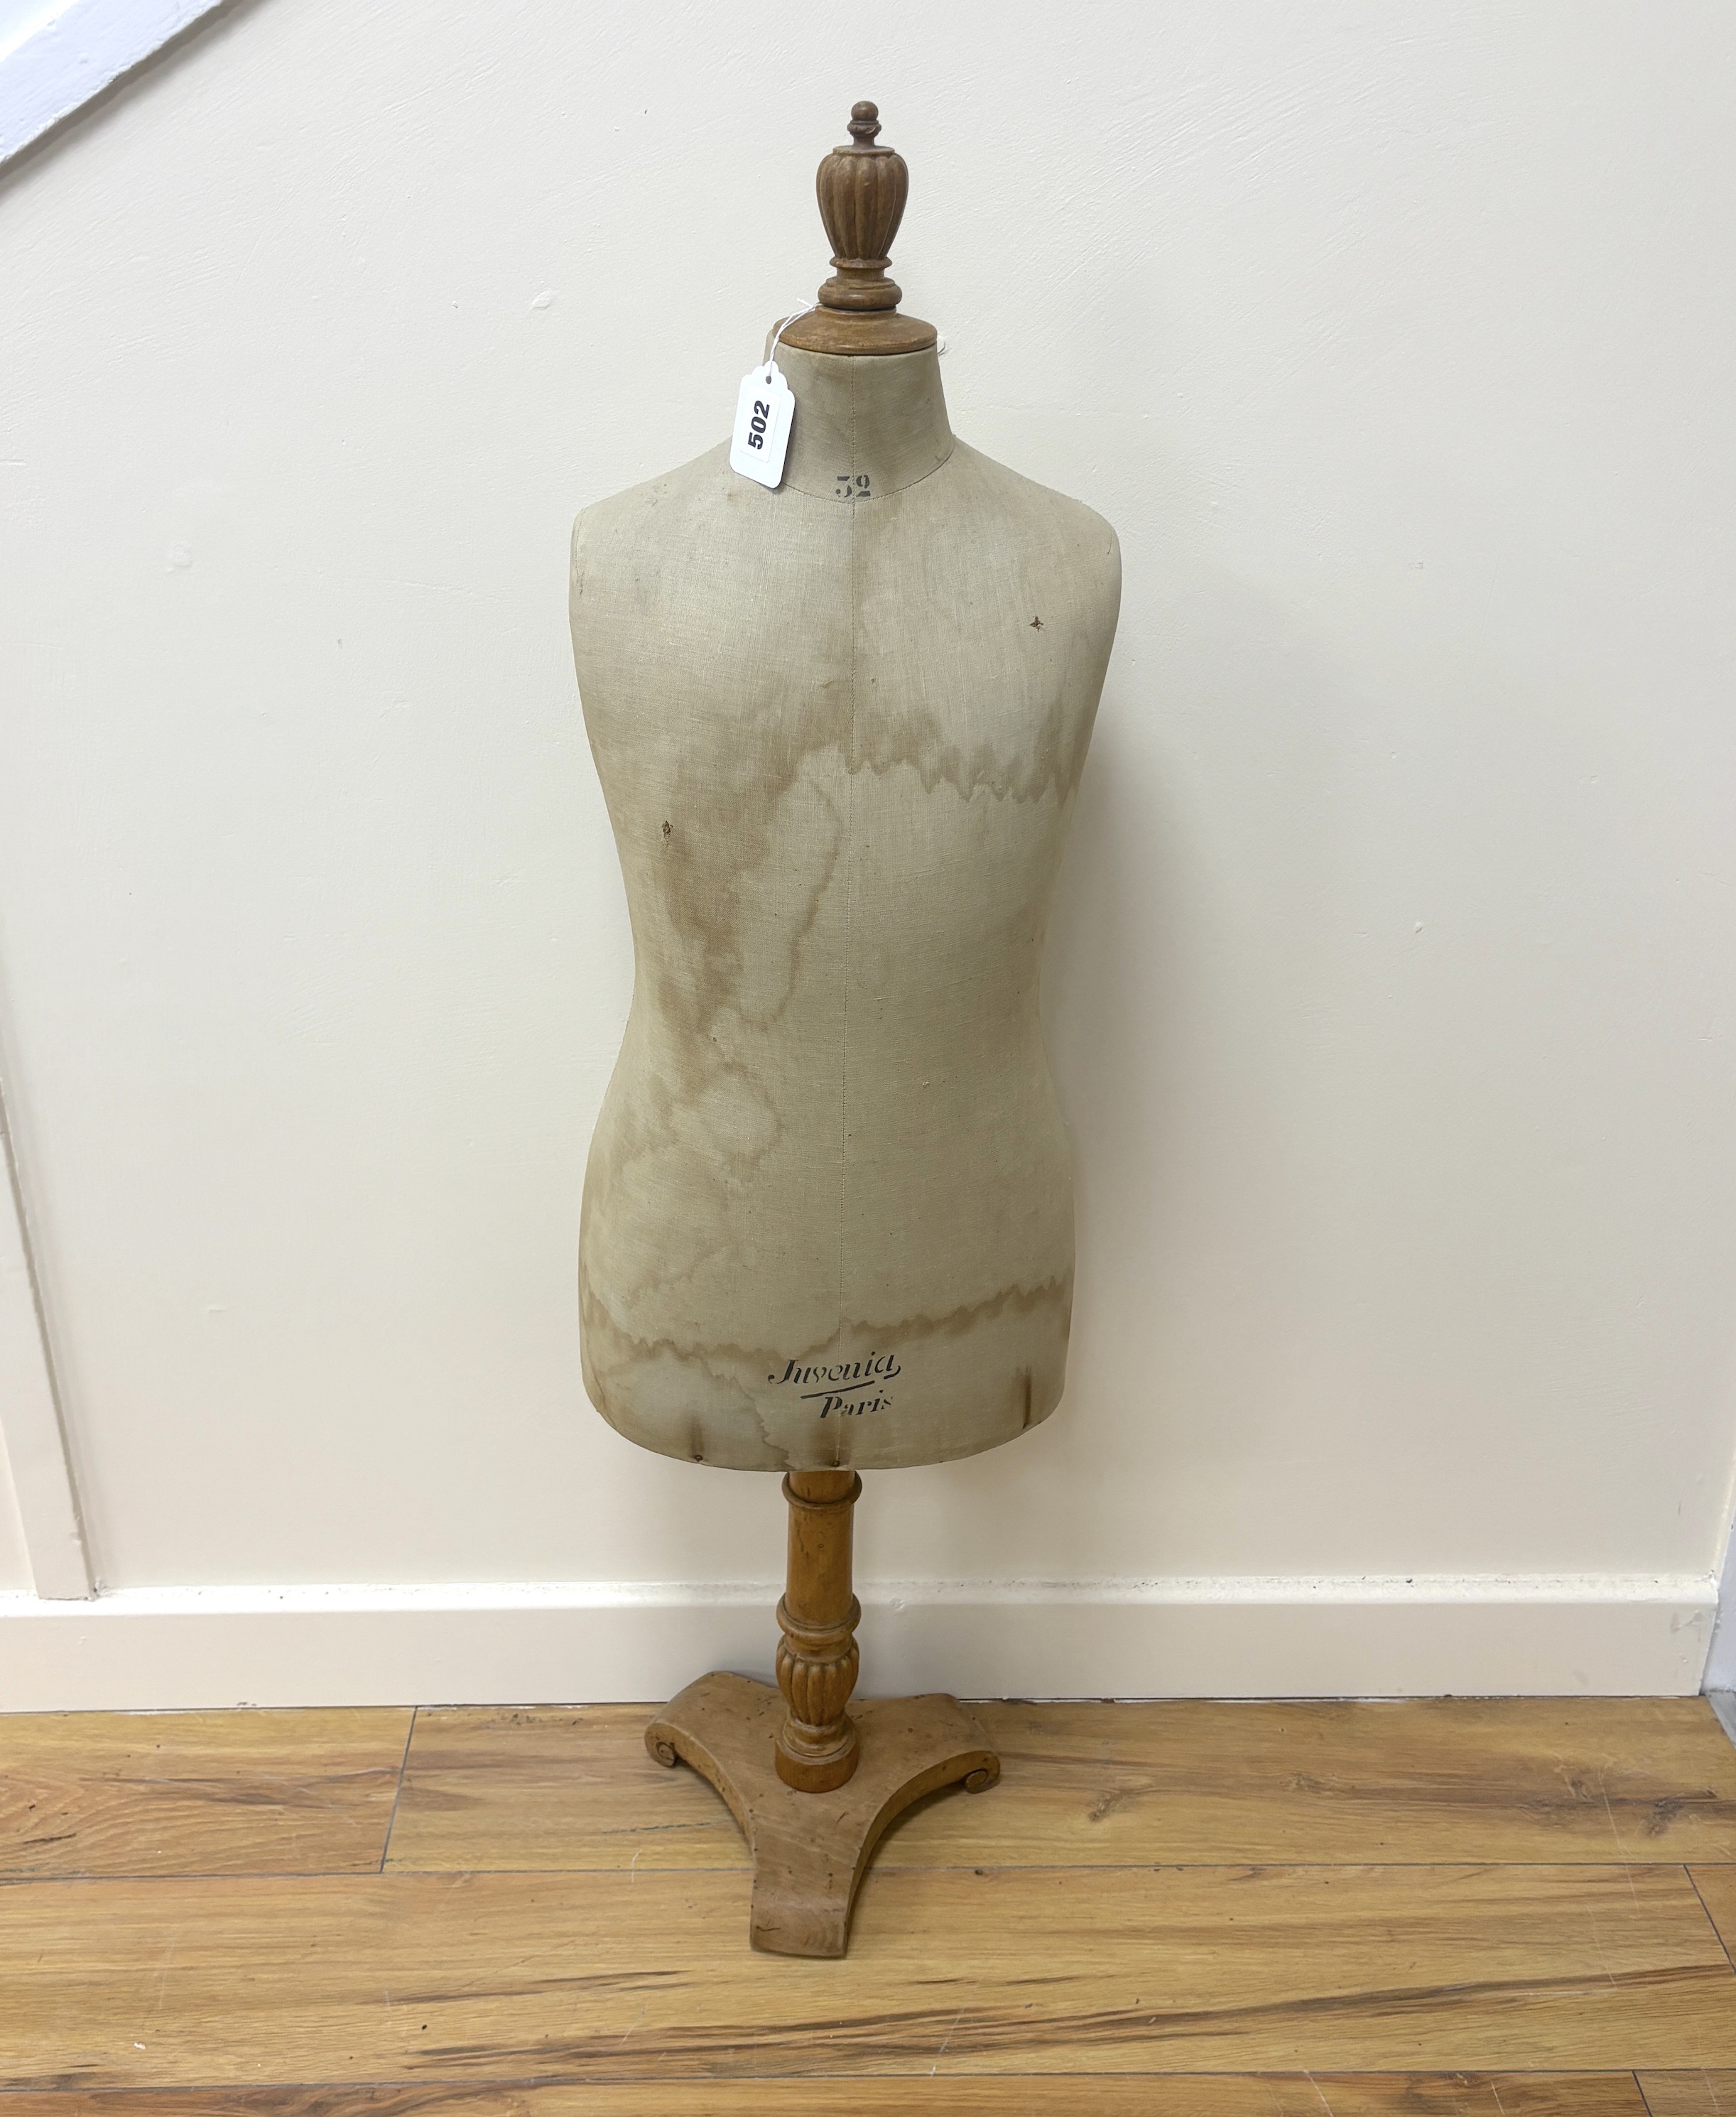 A tailor’s child dummy, Juvenia, Paris, on turned wooden stand 110cm high